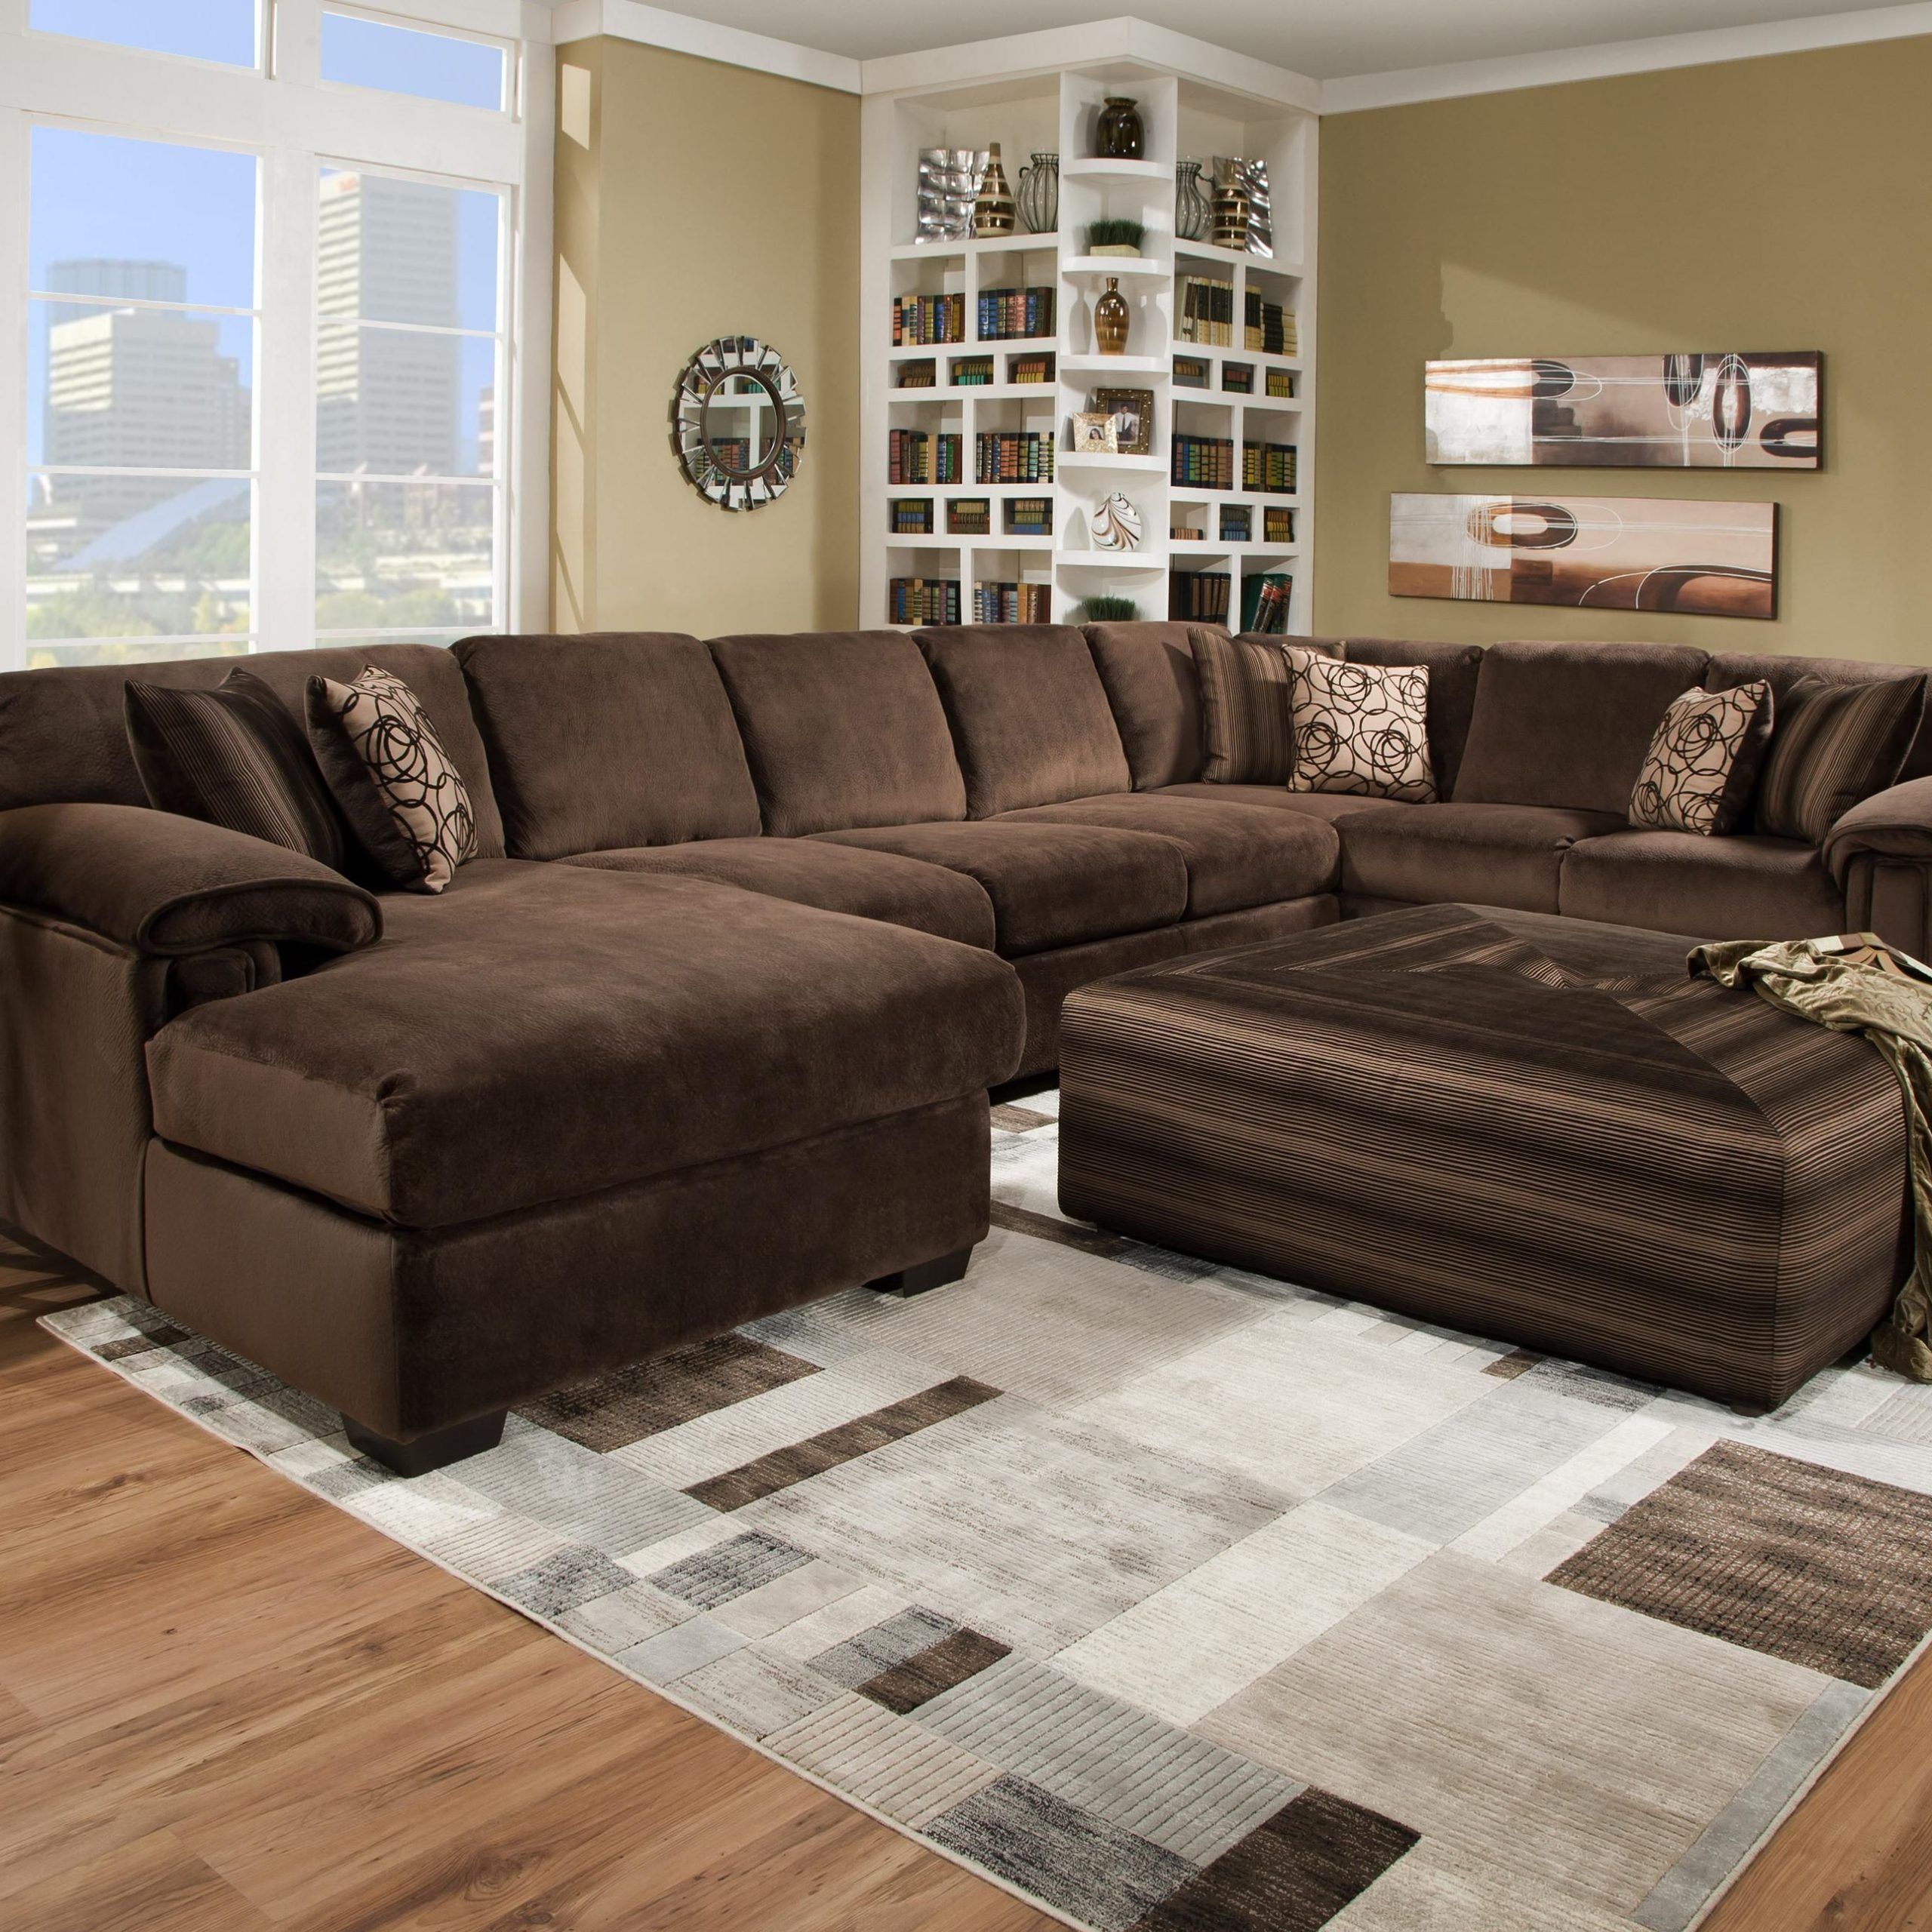 Chocolate Brown Velvet Sectional Sofa | Brown Living Room Decor Throughout Sofas With Ottomans In Brown (View 9 of 20)